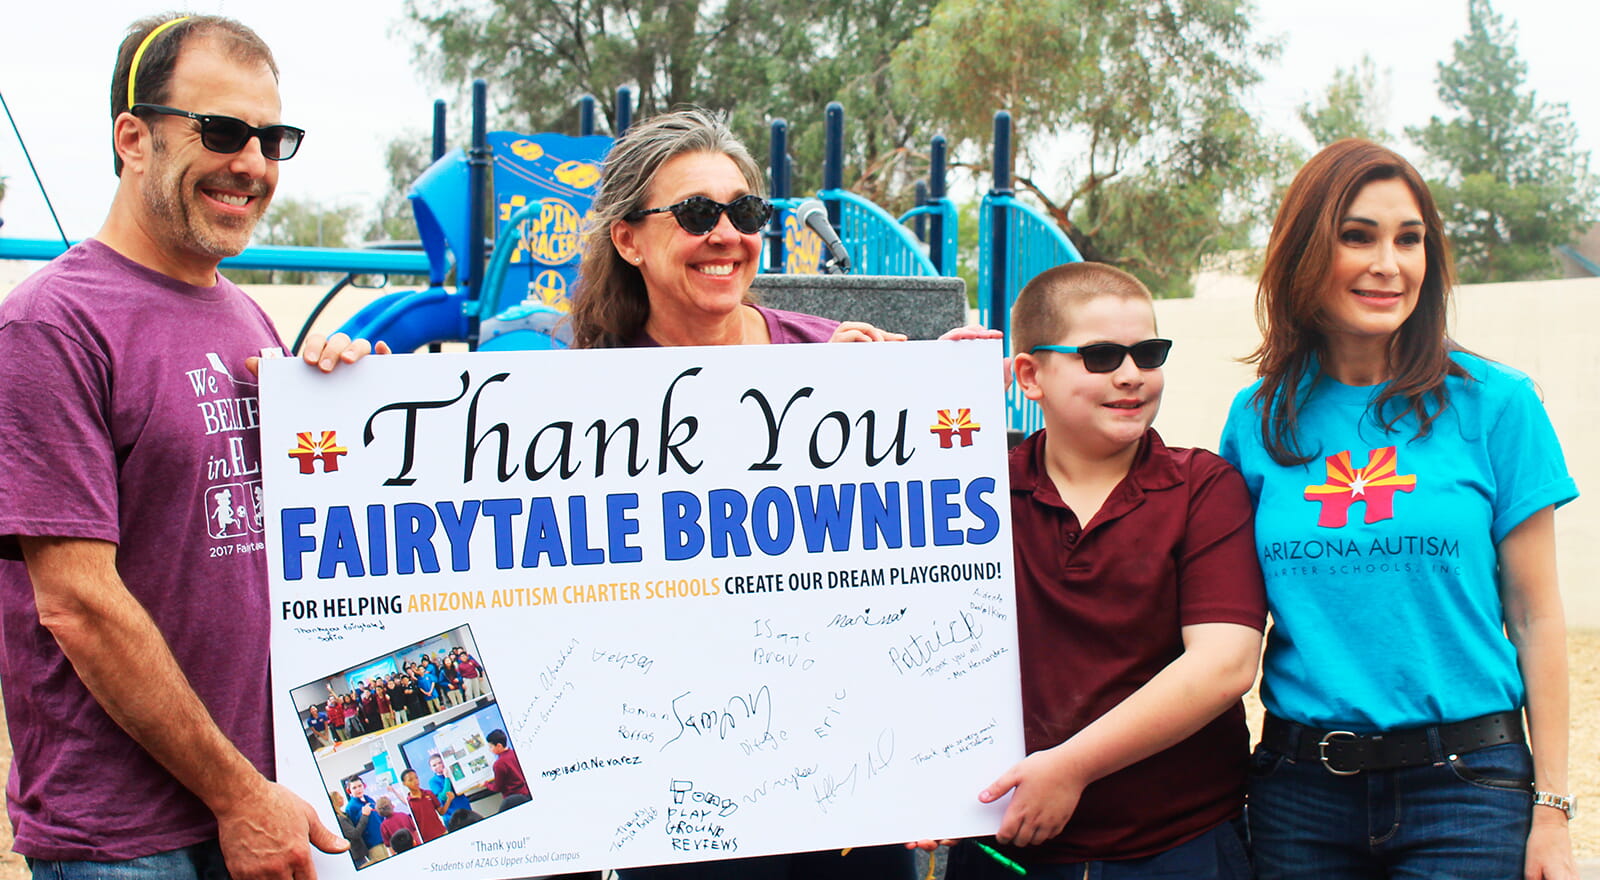 Co-founder David and Eileen receiving thanks from Arizona Autism School